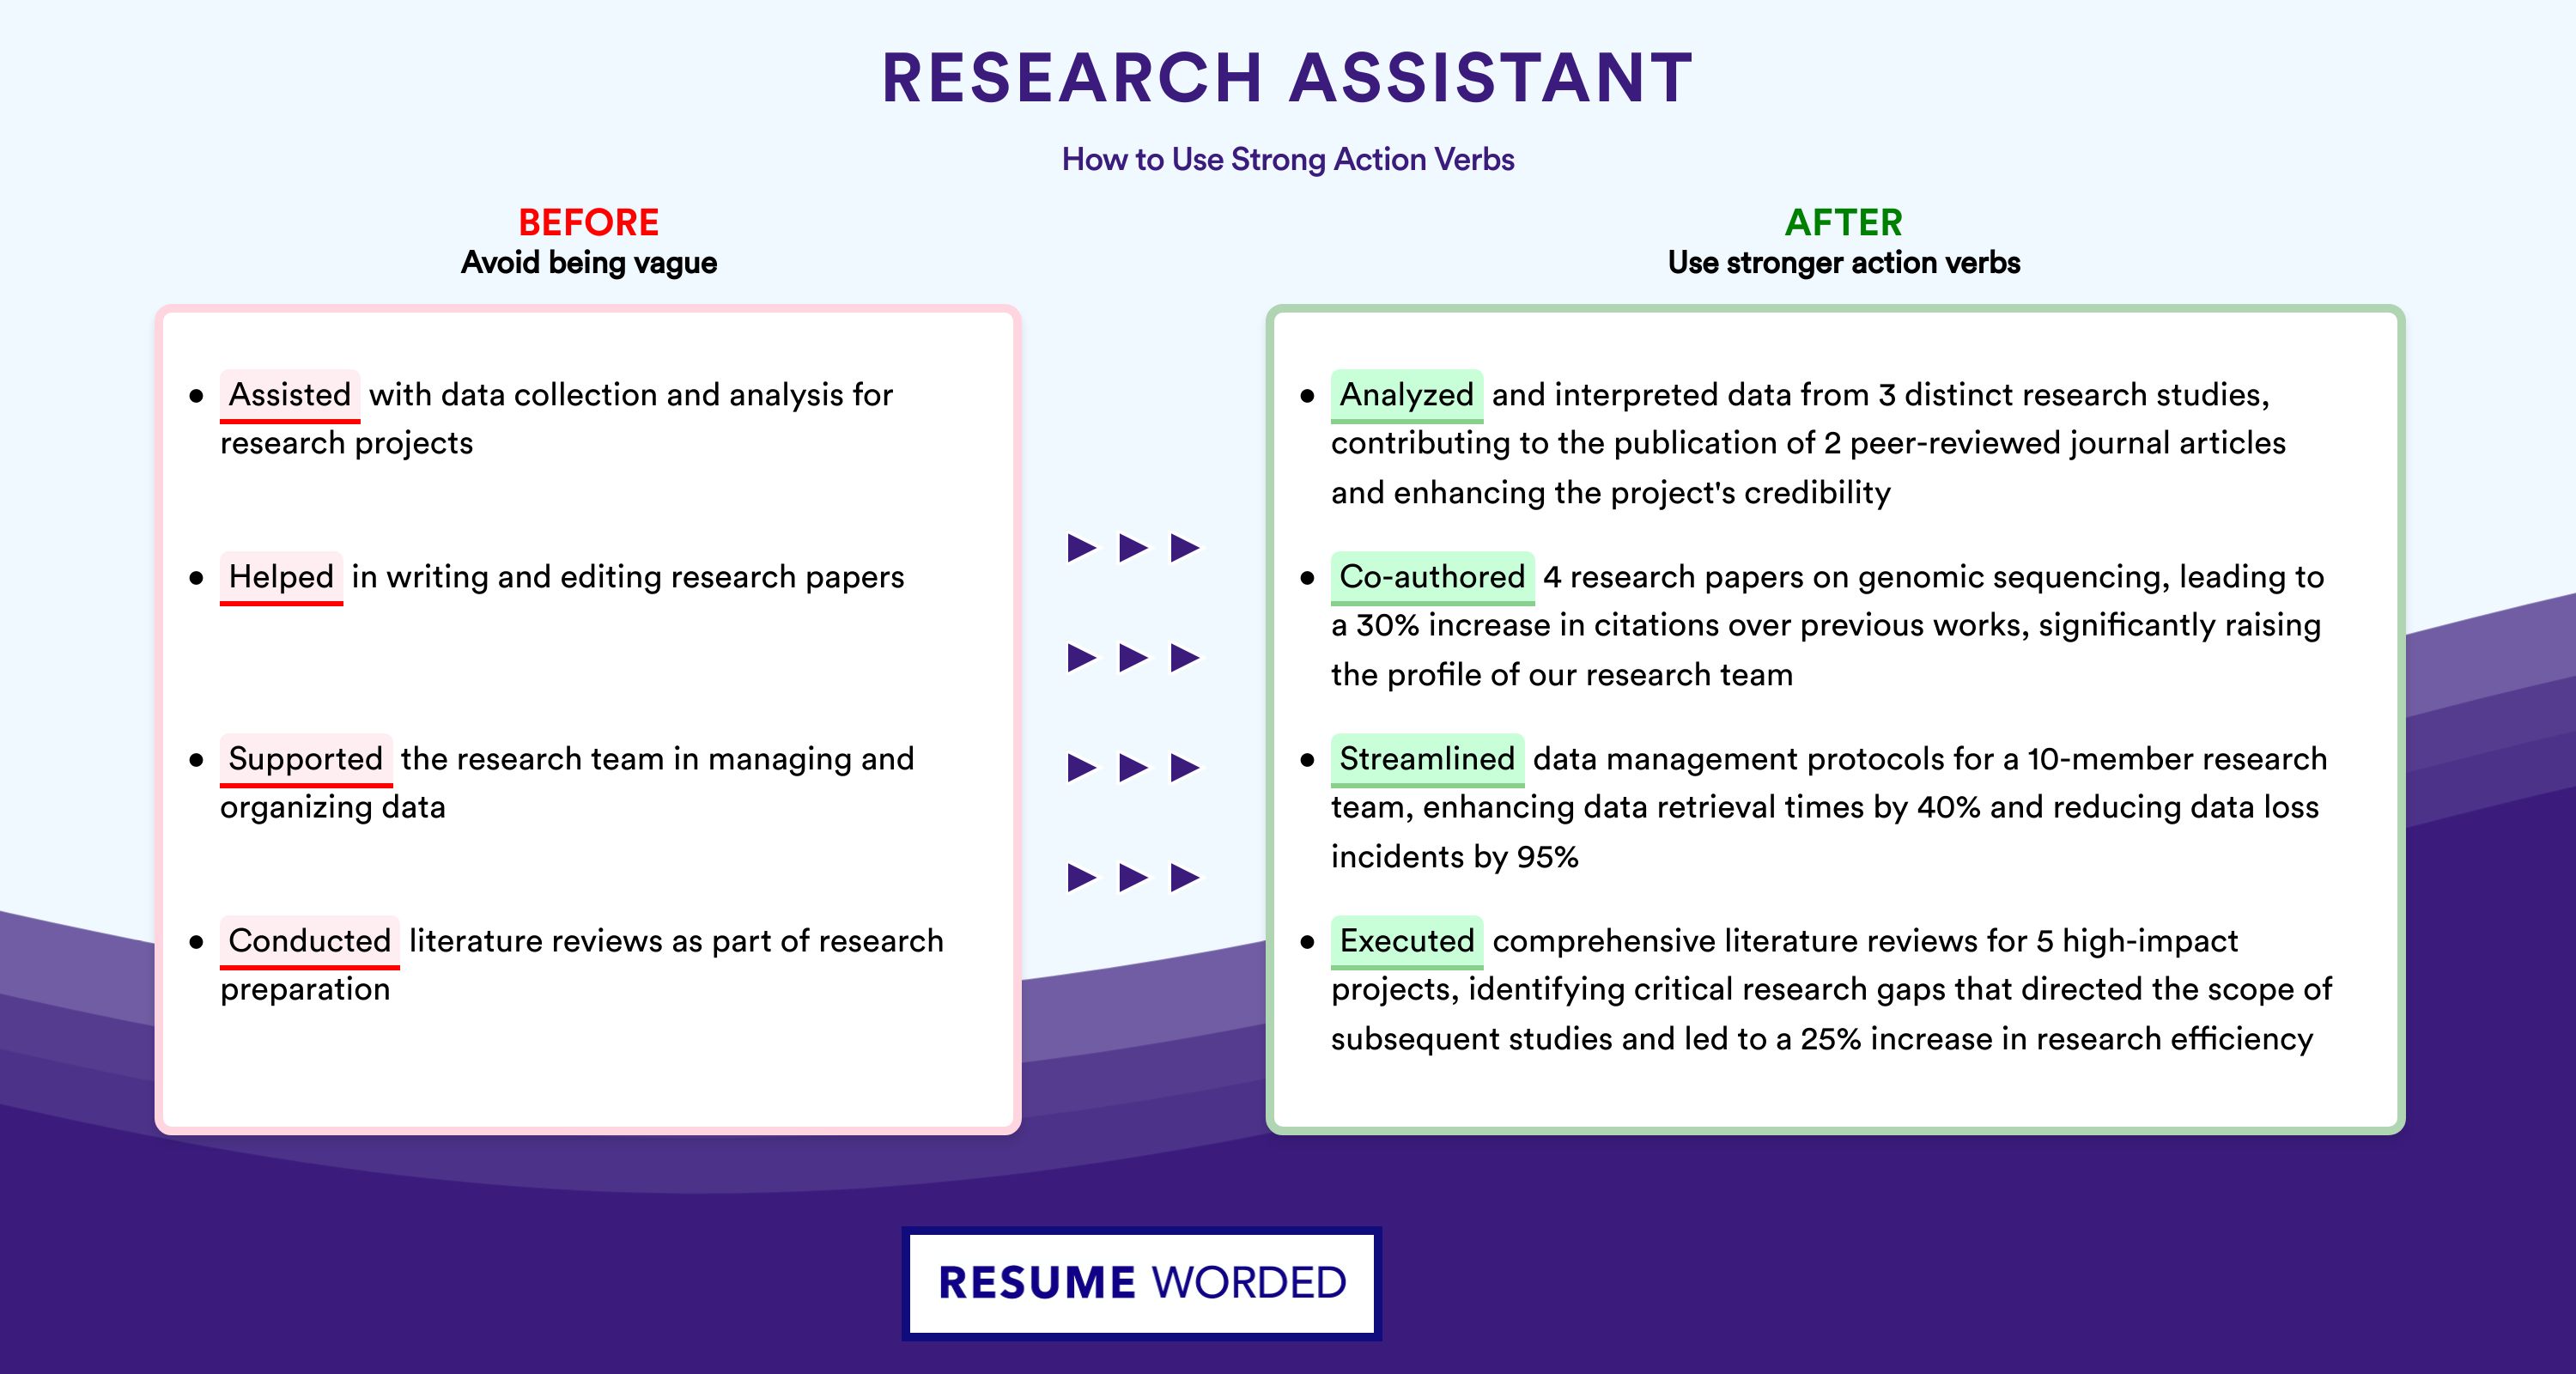 Action Verbs for Research Assistant